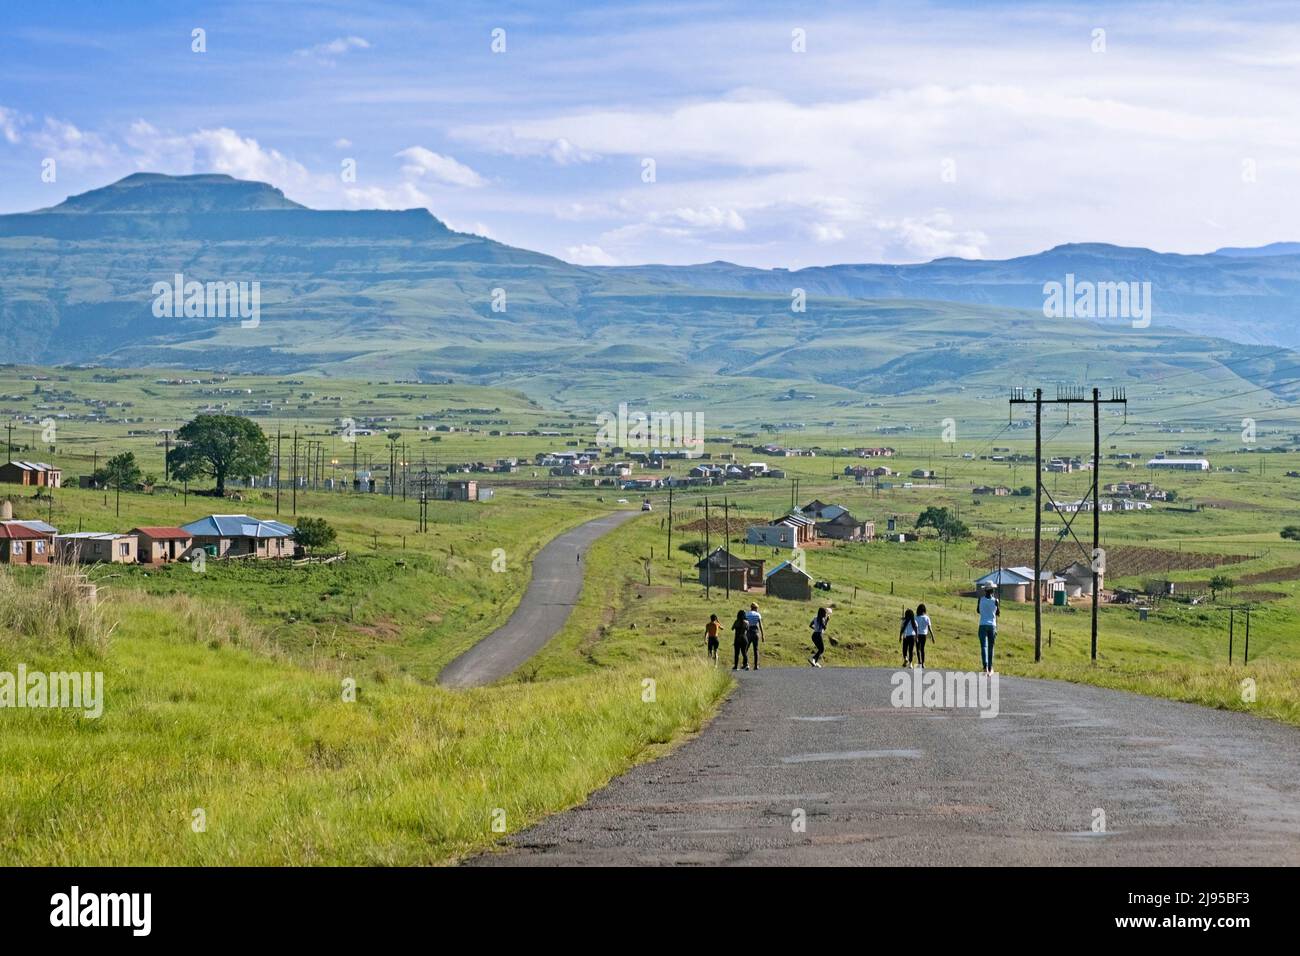 Drakensberg Mountain Range and rural settlement in the countryside of Injisuthi area in KwaZulu-Natal, South Africa Stock Photo